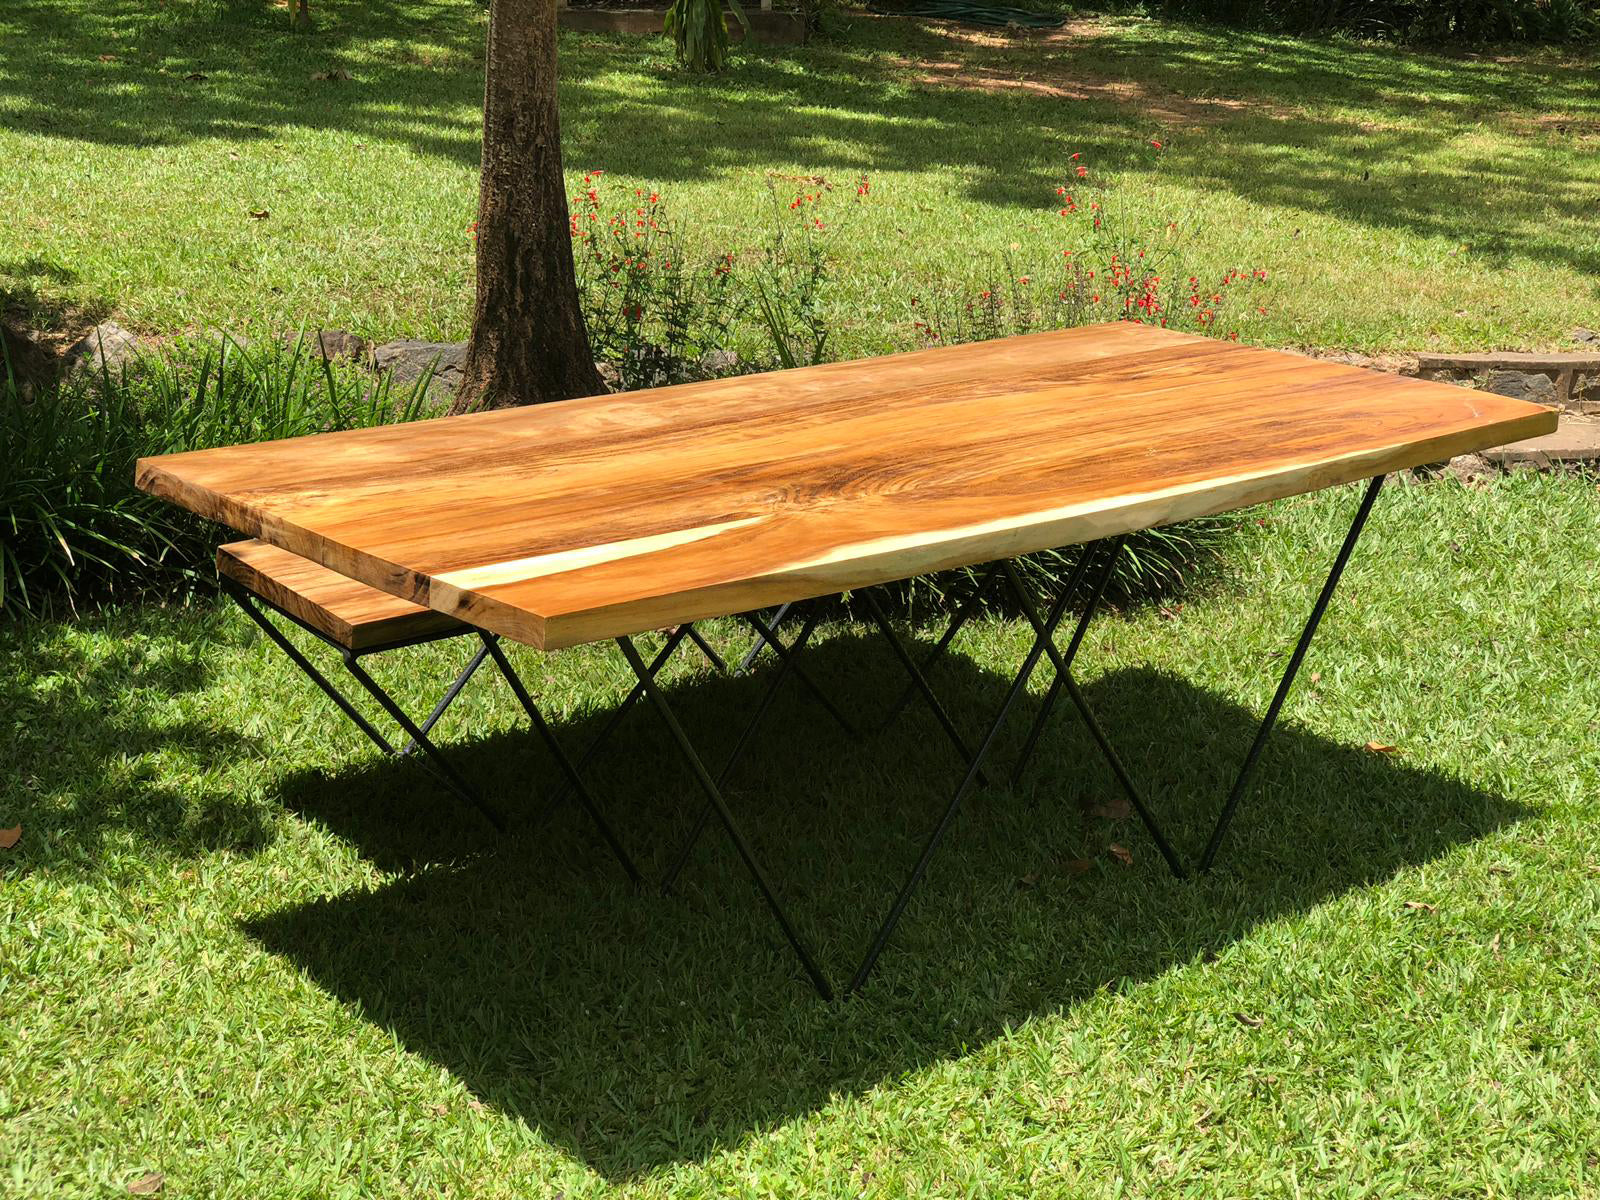 Straight Edge Wood Table - Mid Century Modern - Live Edge Table and Bench